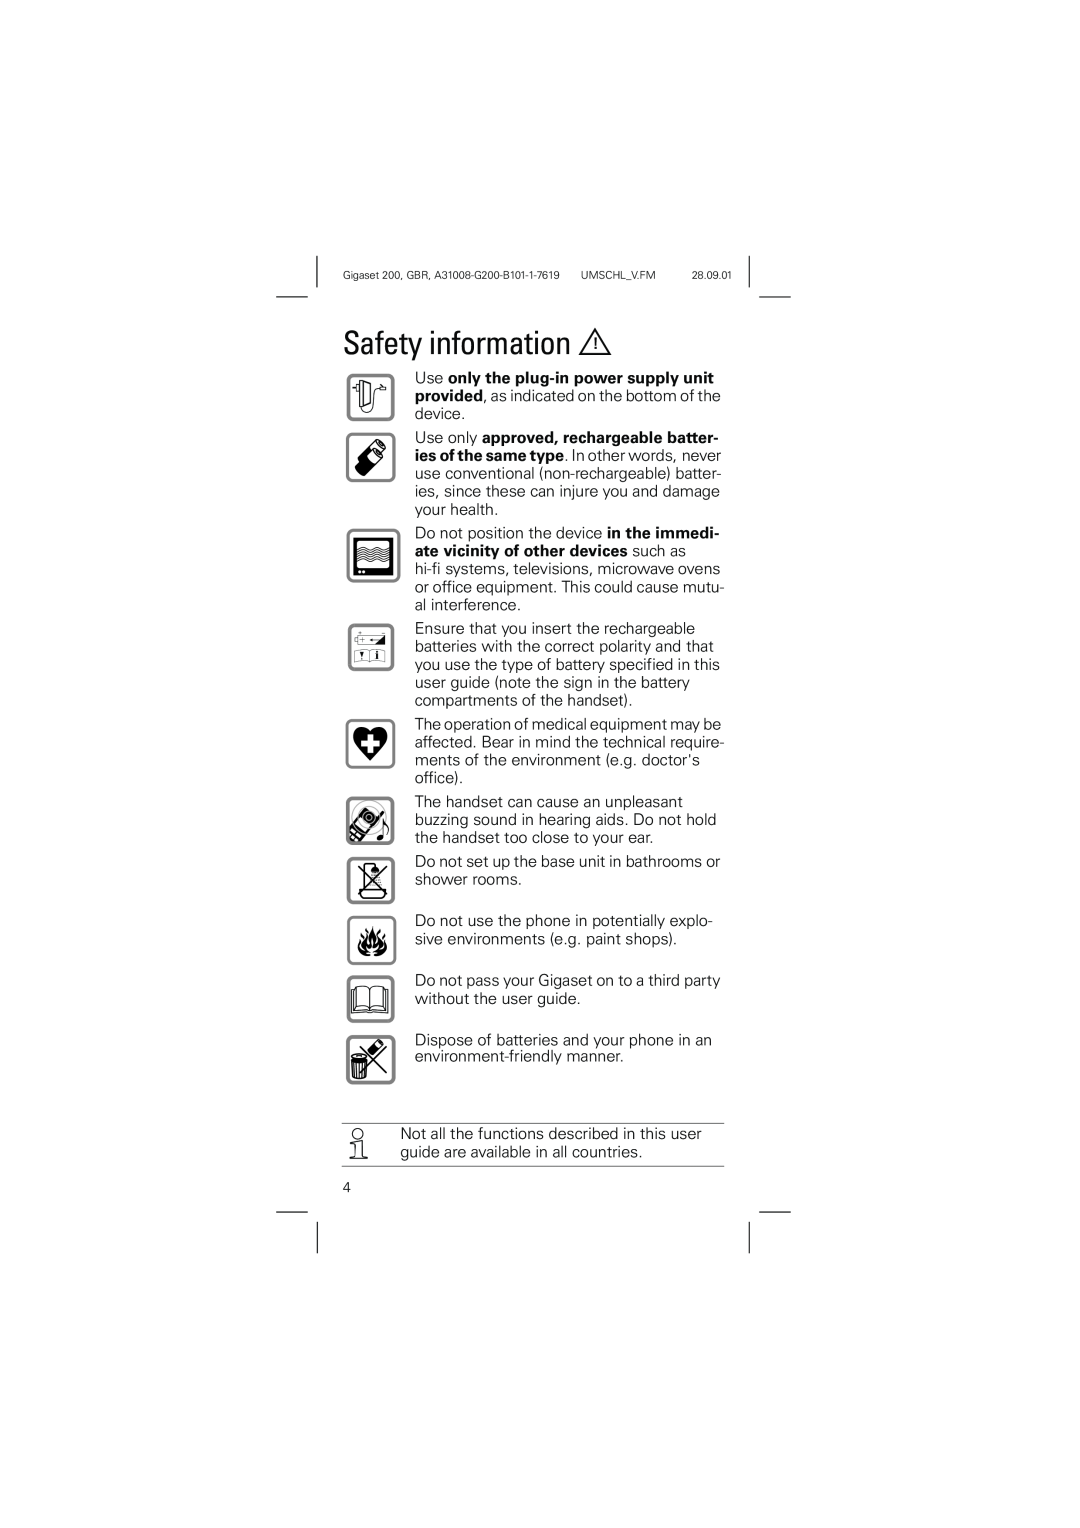 Siemens 200 manual Safety information, Use only the plug-inpower supply unit 